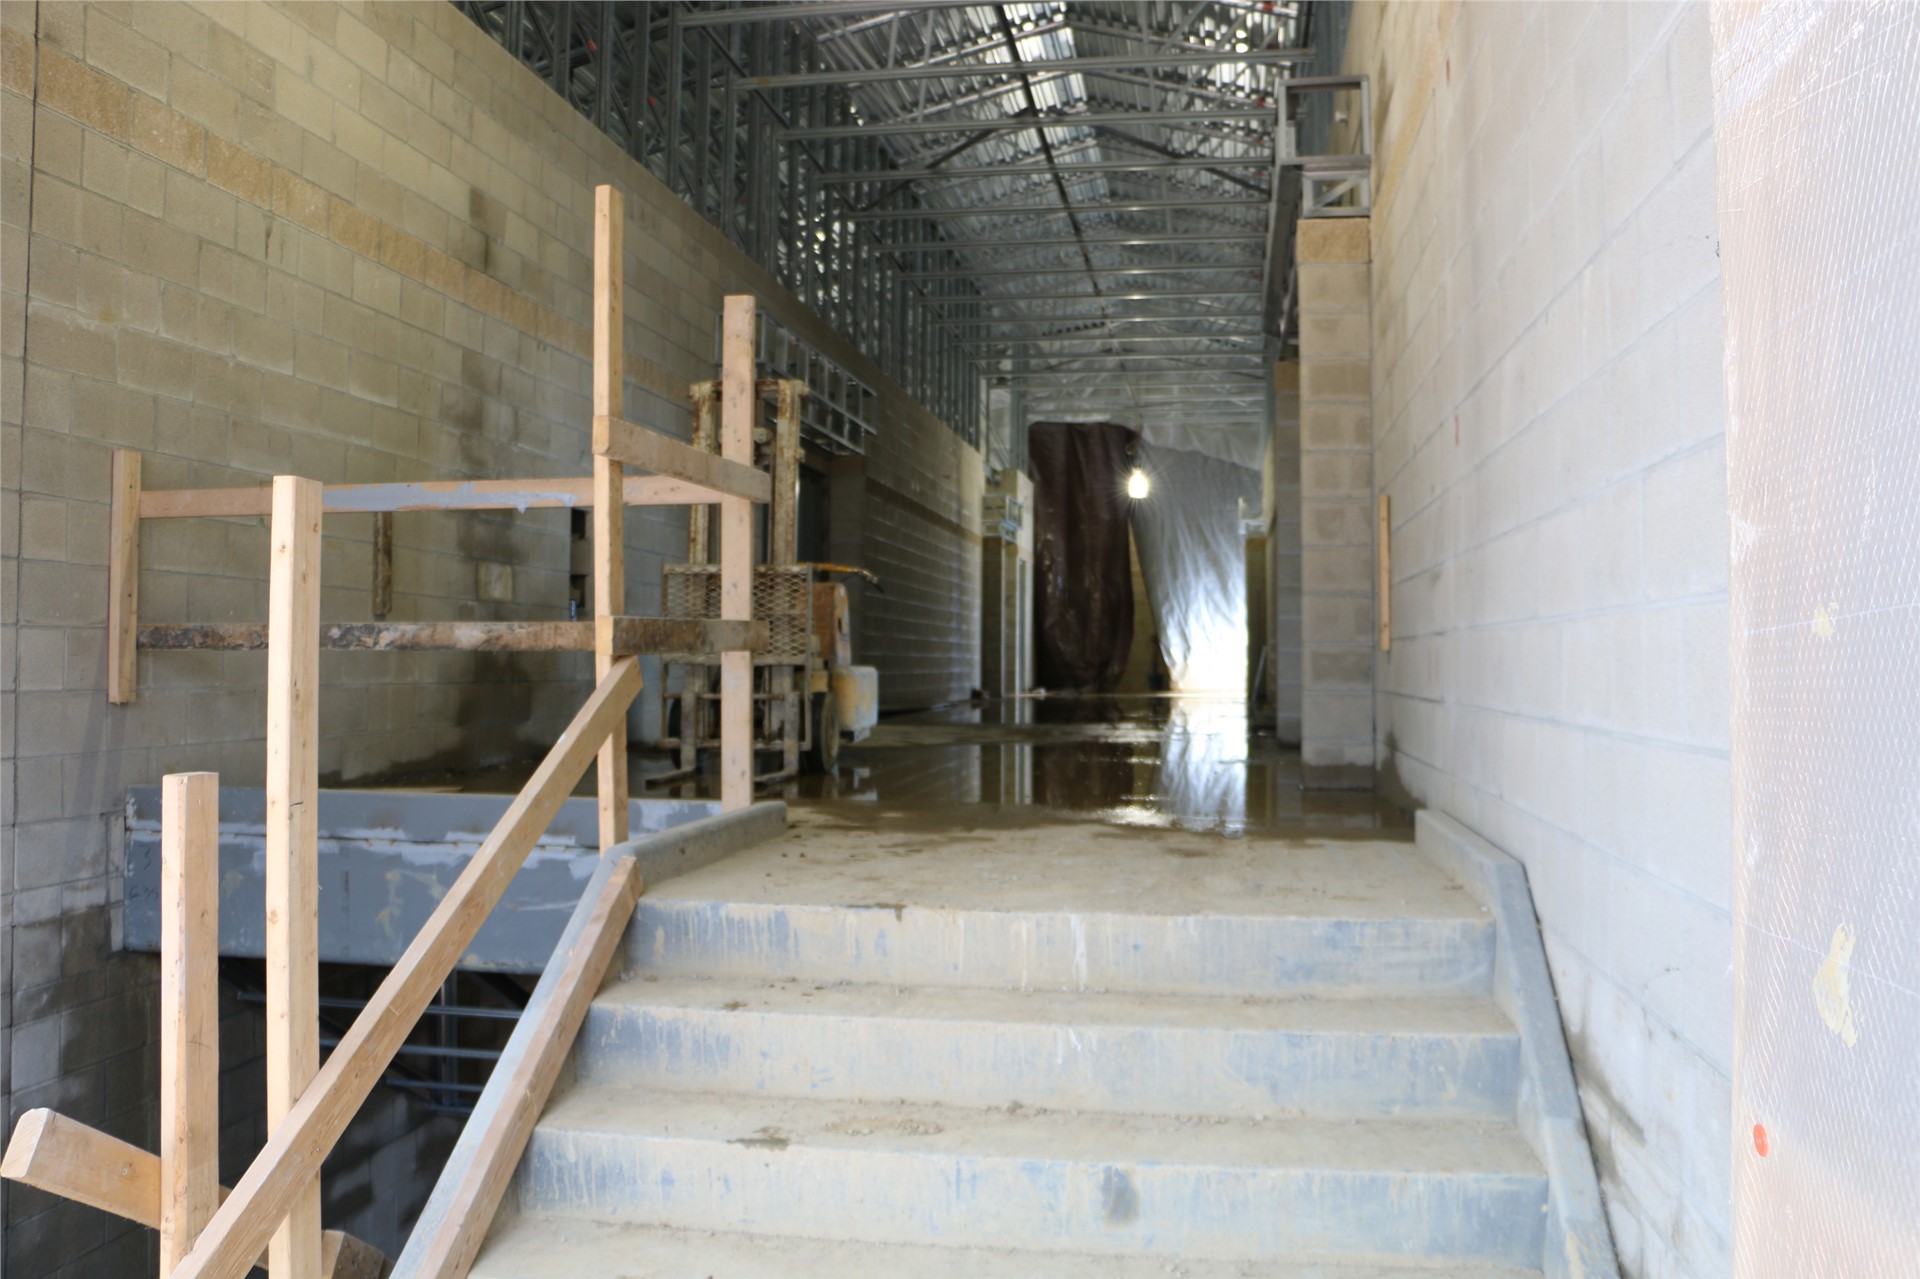 View of mathematics corridor from midpoint landing on stairwell